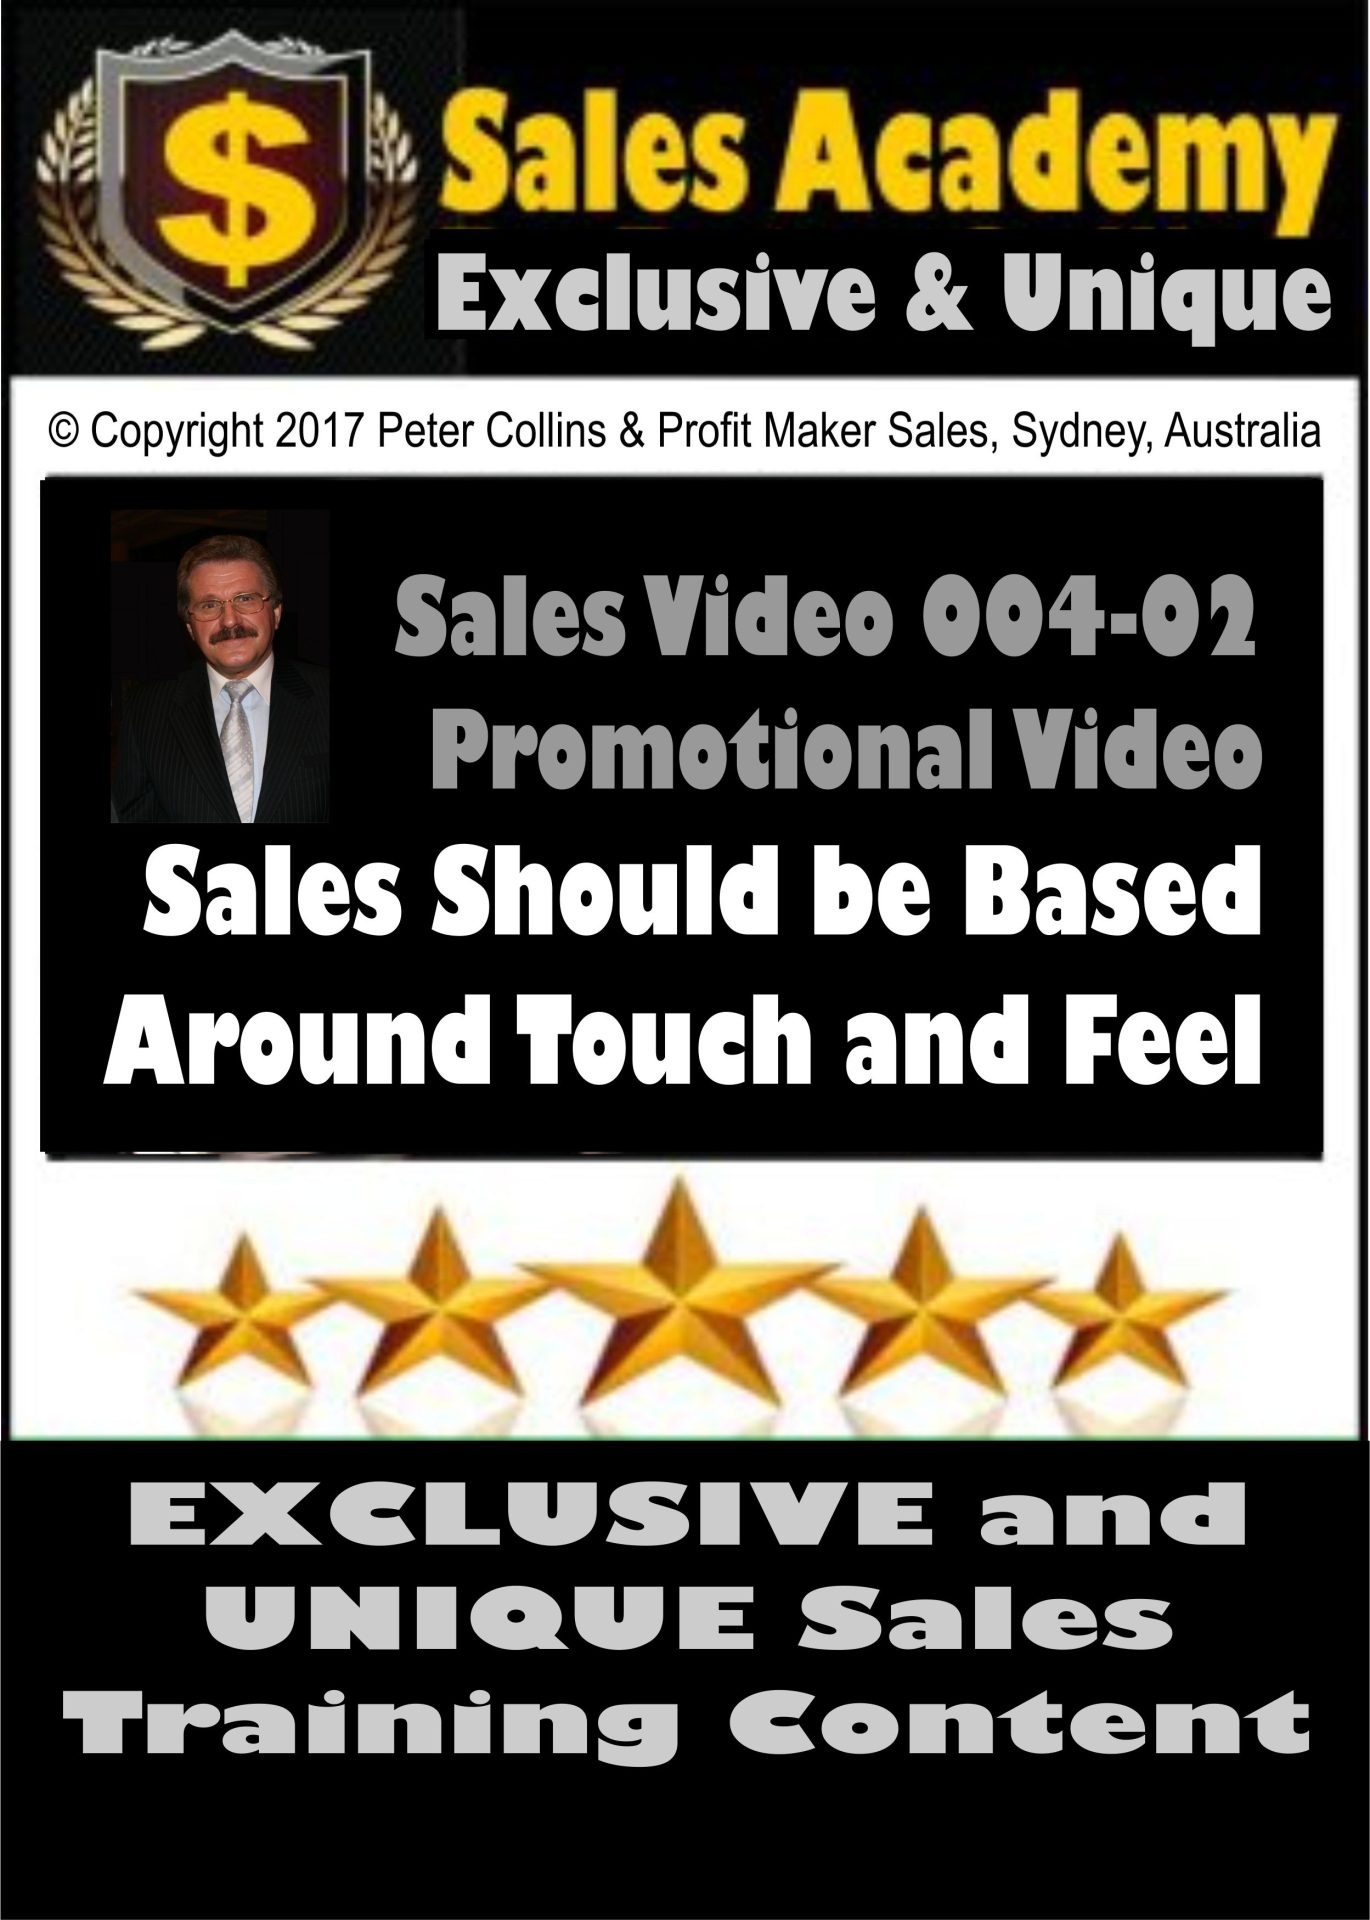 004-02 = Vintage Sales Training 004-02 – Sales Should be Based Around Touch and Feel – 20 Videos – Total over 1 Hour of Training